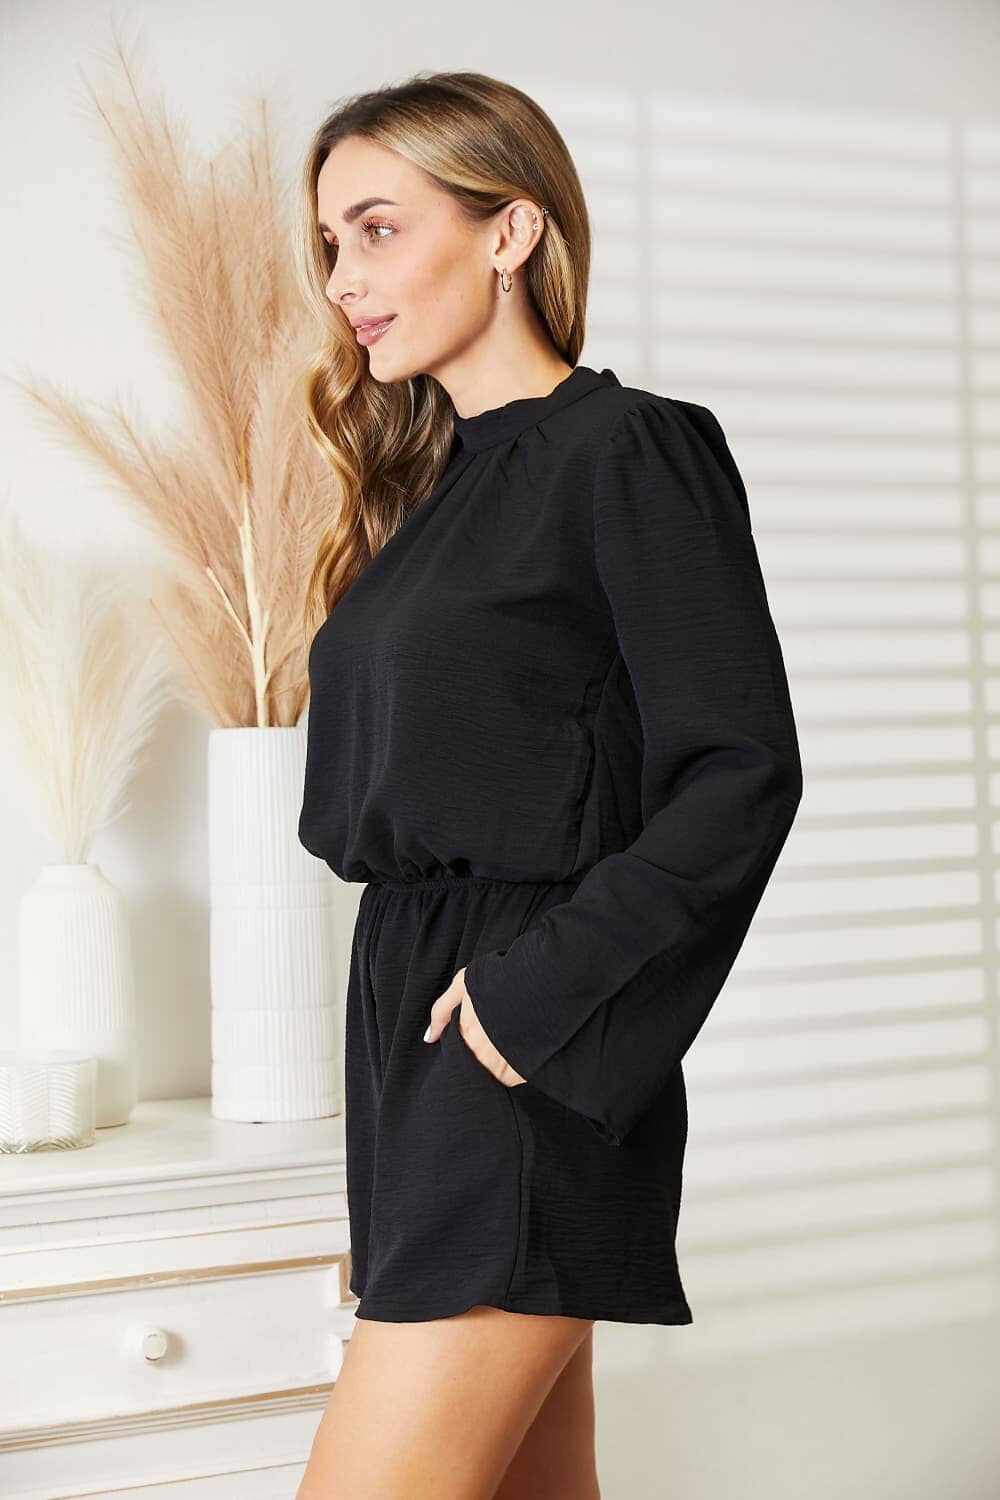 Culture Code Black Open Back Romper with Pockets Jumpsuits & Rompers jehouze 